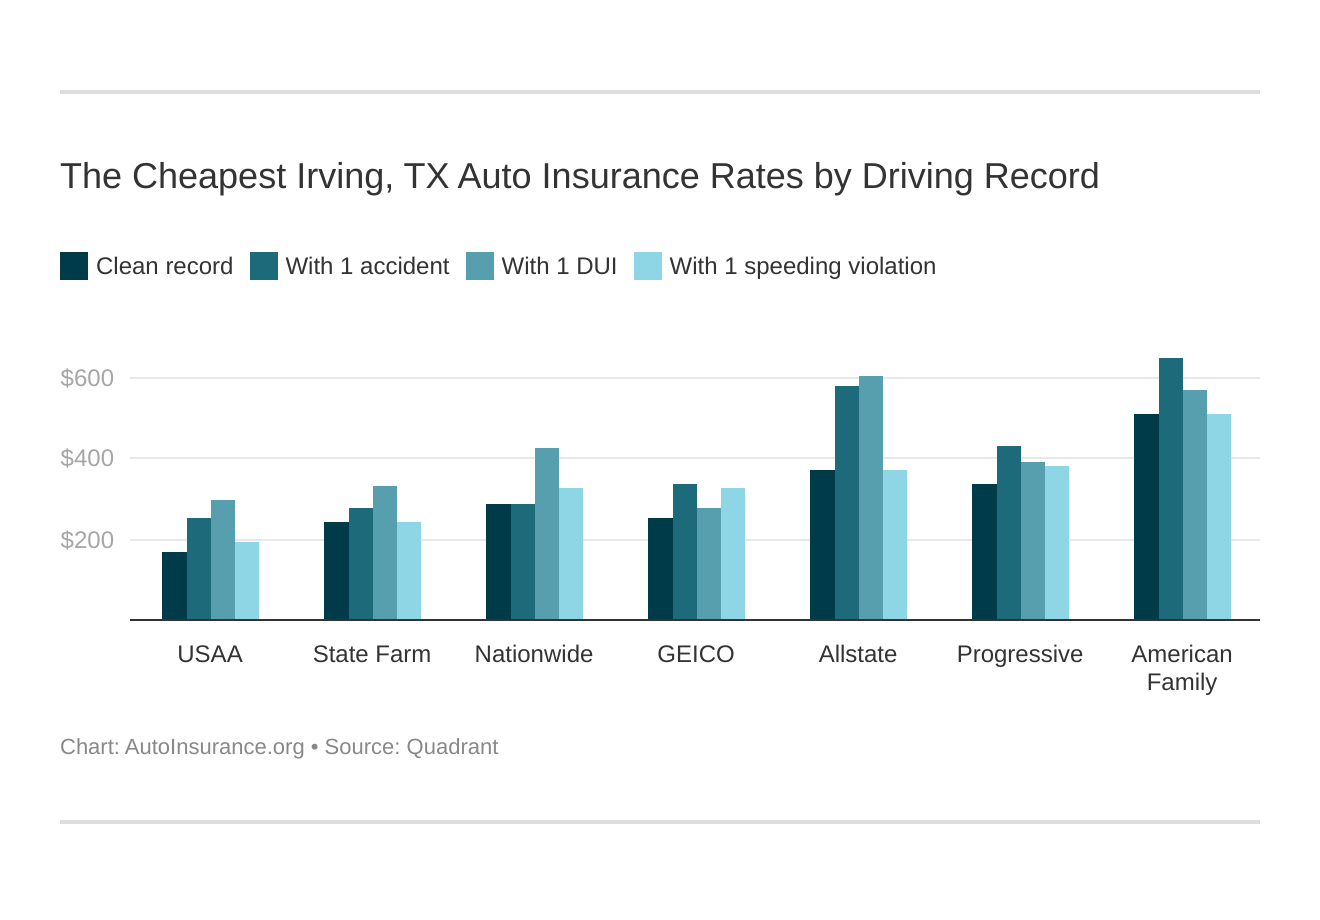 The Cheapest Irving, TX Auto Insurance Rates by Driving Record